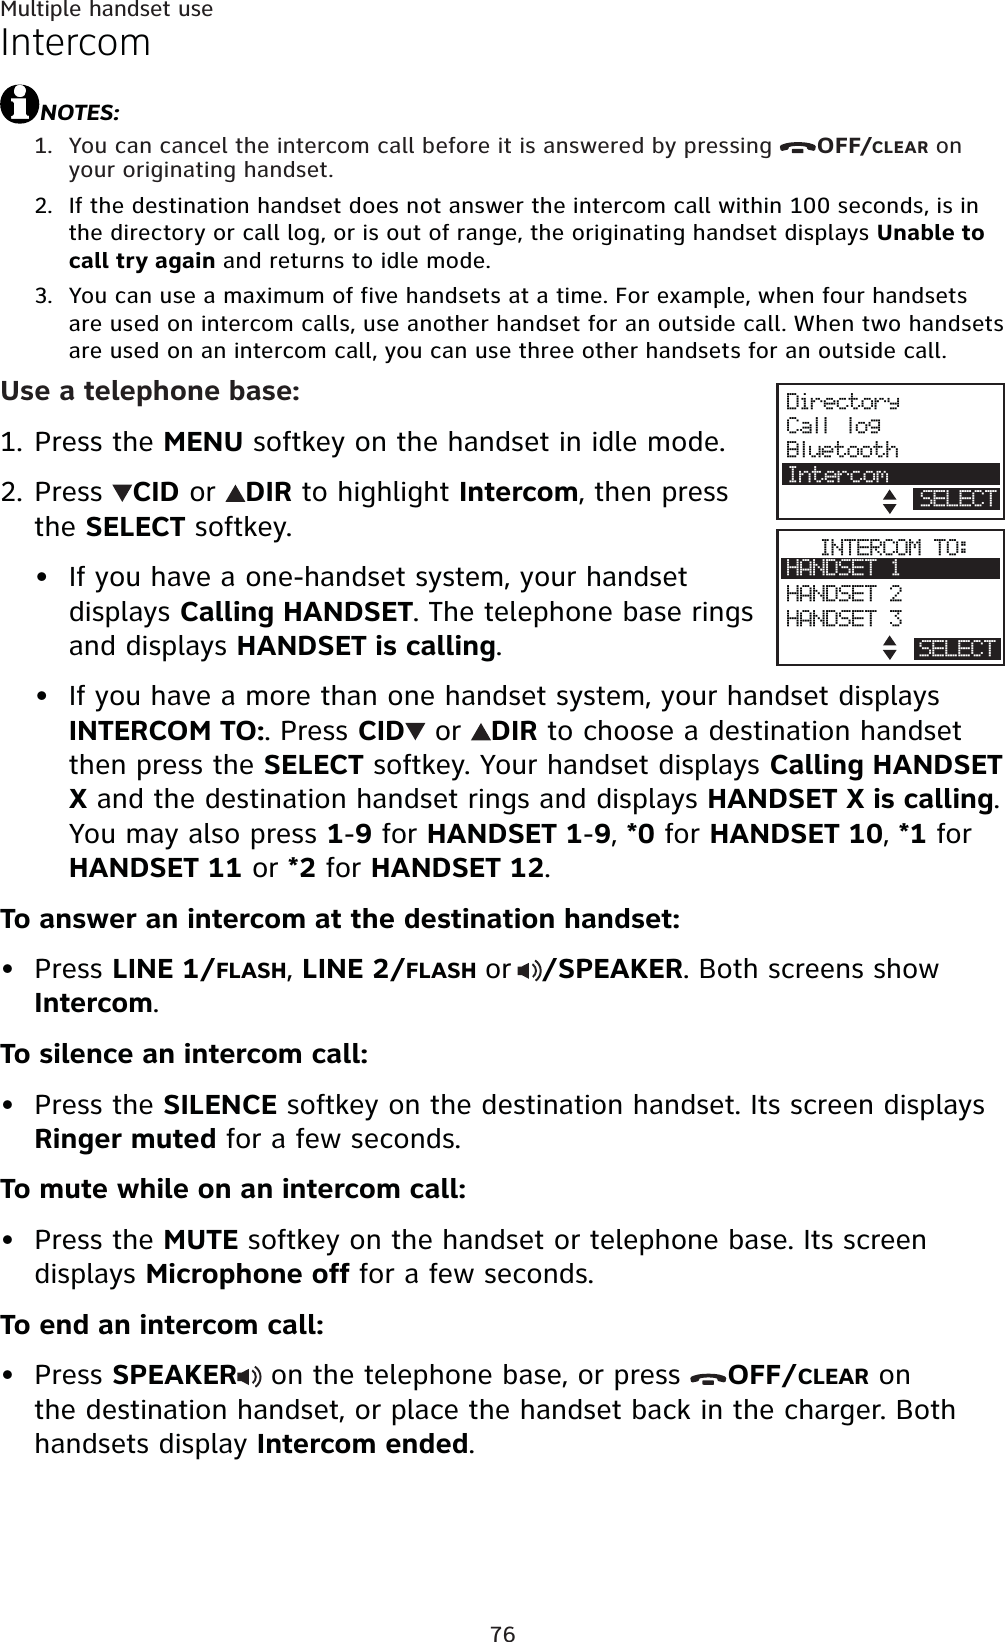 76Multiple handset useIntercomNOTES:You can cancel the intercom call before it is answered by pressing  OFF/CLEAR on your originating handset.If the destination handset does not answer the intercom call within 100 seconds, is in the directory or call log, or is out of range, the originating handset displays Unable to call try again and returns to idle mode.You can use a maximum of five handsets at a time. For example, when four handsets are used on intercom calls, use another handset for an outside call. When two handsets are used on an intercom call, you can use three other handsets for an outside call.Use a telephone base:Press the MENU softkey on the handset in idle mode.Press CID or  DIR to highlight Intercom, then press the SELECT softkey.If you have a one-handset system, your handset displays Calling HANDSET. The telephone base rings and displays HANDSET is calling.If you have a more than one handset system, your handset displays INTERCOM TO:. Press CID  or  DIR to choose a destination handset then press the SELECT softkey. Your handset displays Calling HANDSET X and the destination handset rings and displays HANDSET X is calling.You may also press 1-9 for HANDSET 1-9,*0 for HANDSET 10,*1 for HANDSET 11 or *2 for HANDSET 12.To answer an intercom at the destination handset:Press LINE 1/FLASH,LINE 2/FLASHor/SPEAKER. Both screens show Intercom.To silence an intercom call:Press the SILENCE softkey on the destination handset. Its screen displays Ringer muted for a few seconds.To mute while on an intercom call:Press the MUTE softkey on the handset or telephone base. Its screen displays Microphone off for a few seconds.To end an intercom call:Press SPEAKER  on the telephone base, or press  OFF/CLEAR on the destination handset, or place the handset back in the charger. Both handsets display Intercom ended.1.2.3.1.2.••••••DirectoryCall logBluetoothIntercomSELECTINTERCOM TO:HANDSET 1HANDSET 2HANDSET 3BACK SELECT